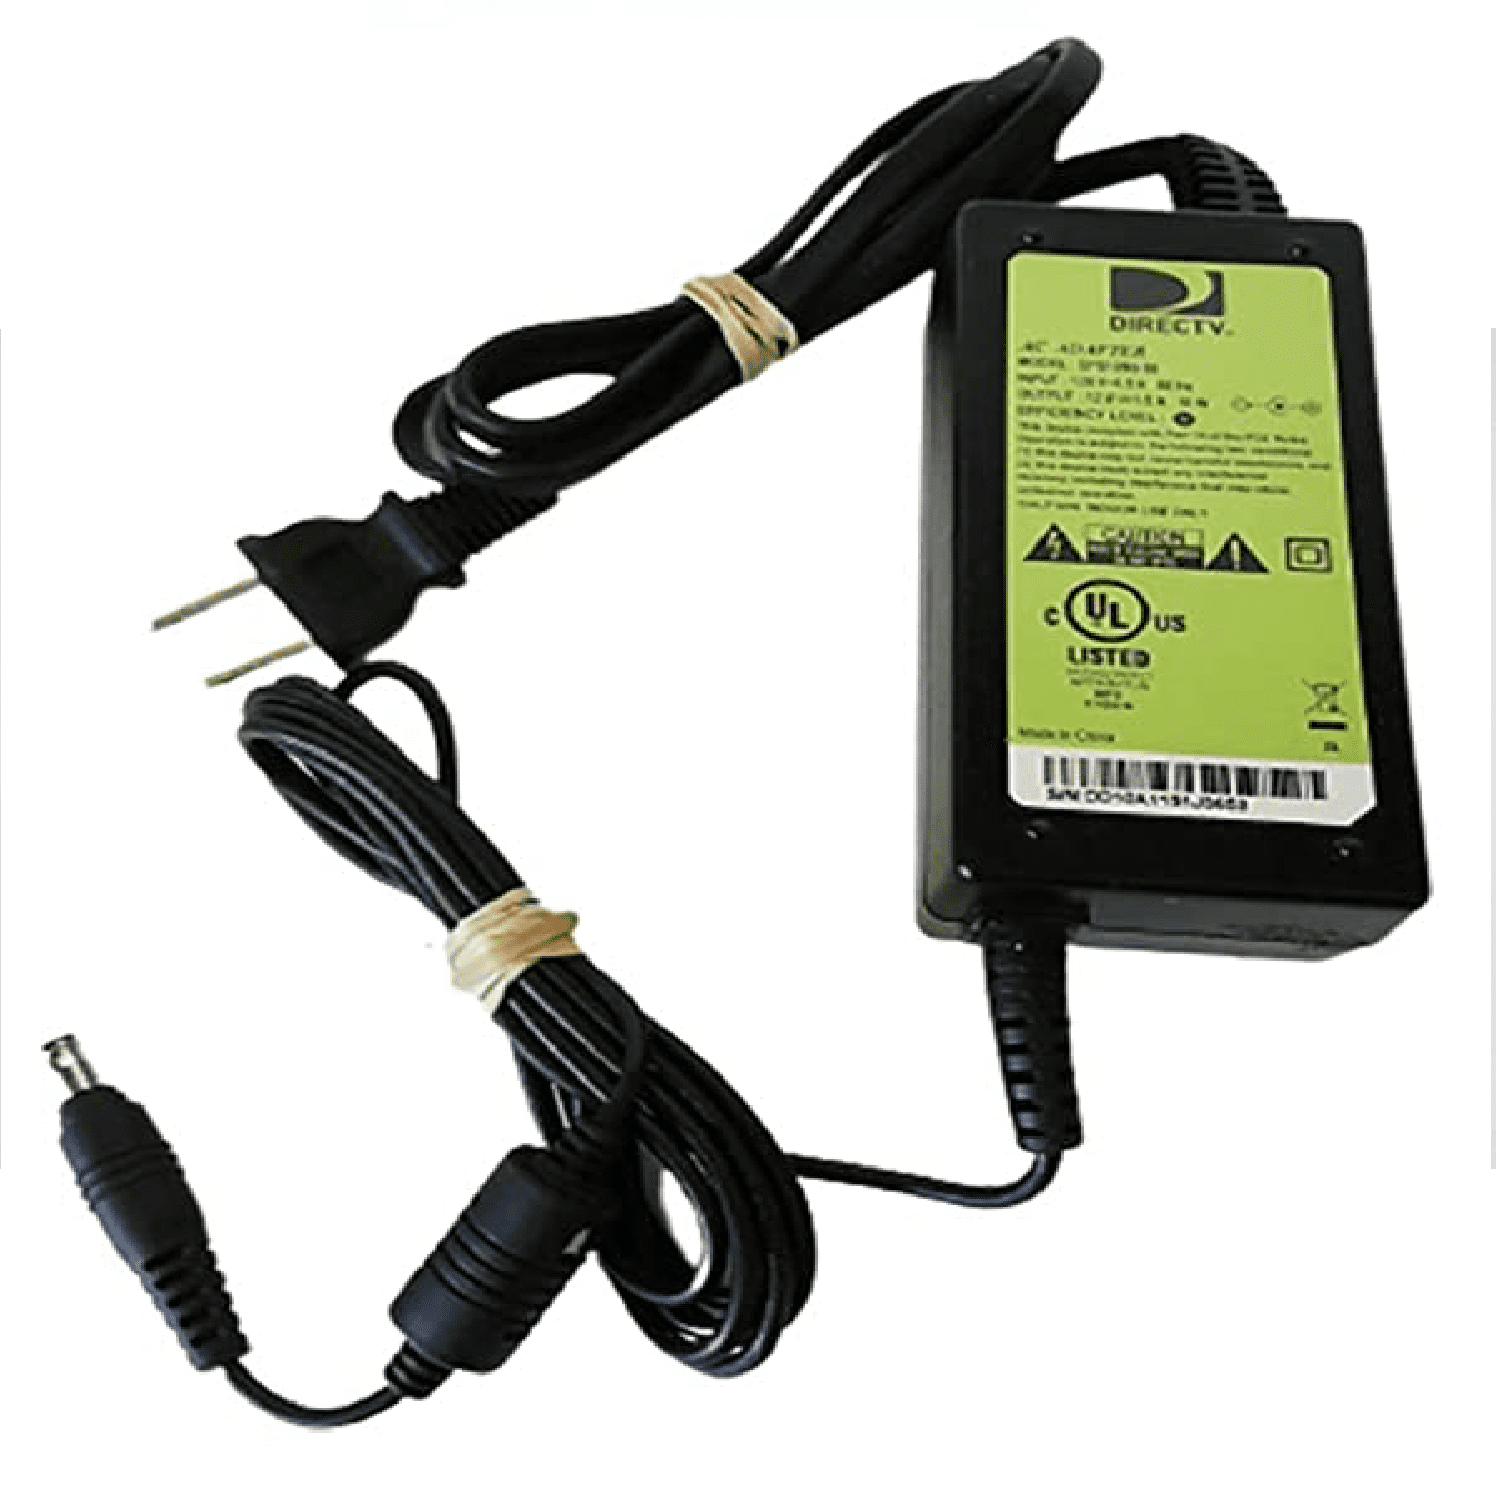 Directv H25 Power Supply C31 C41 C41W Charger 12V 1.5A 18W Model EPS10 